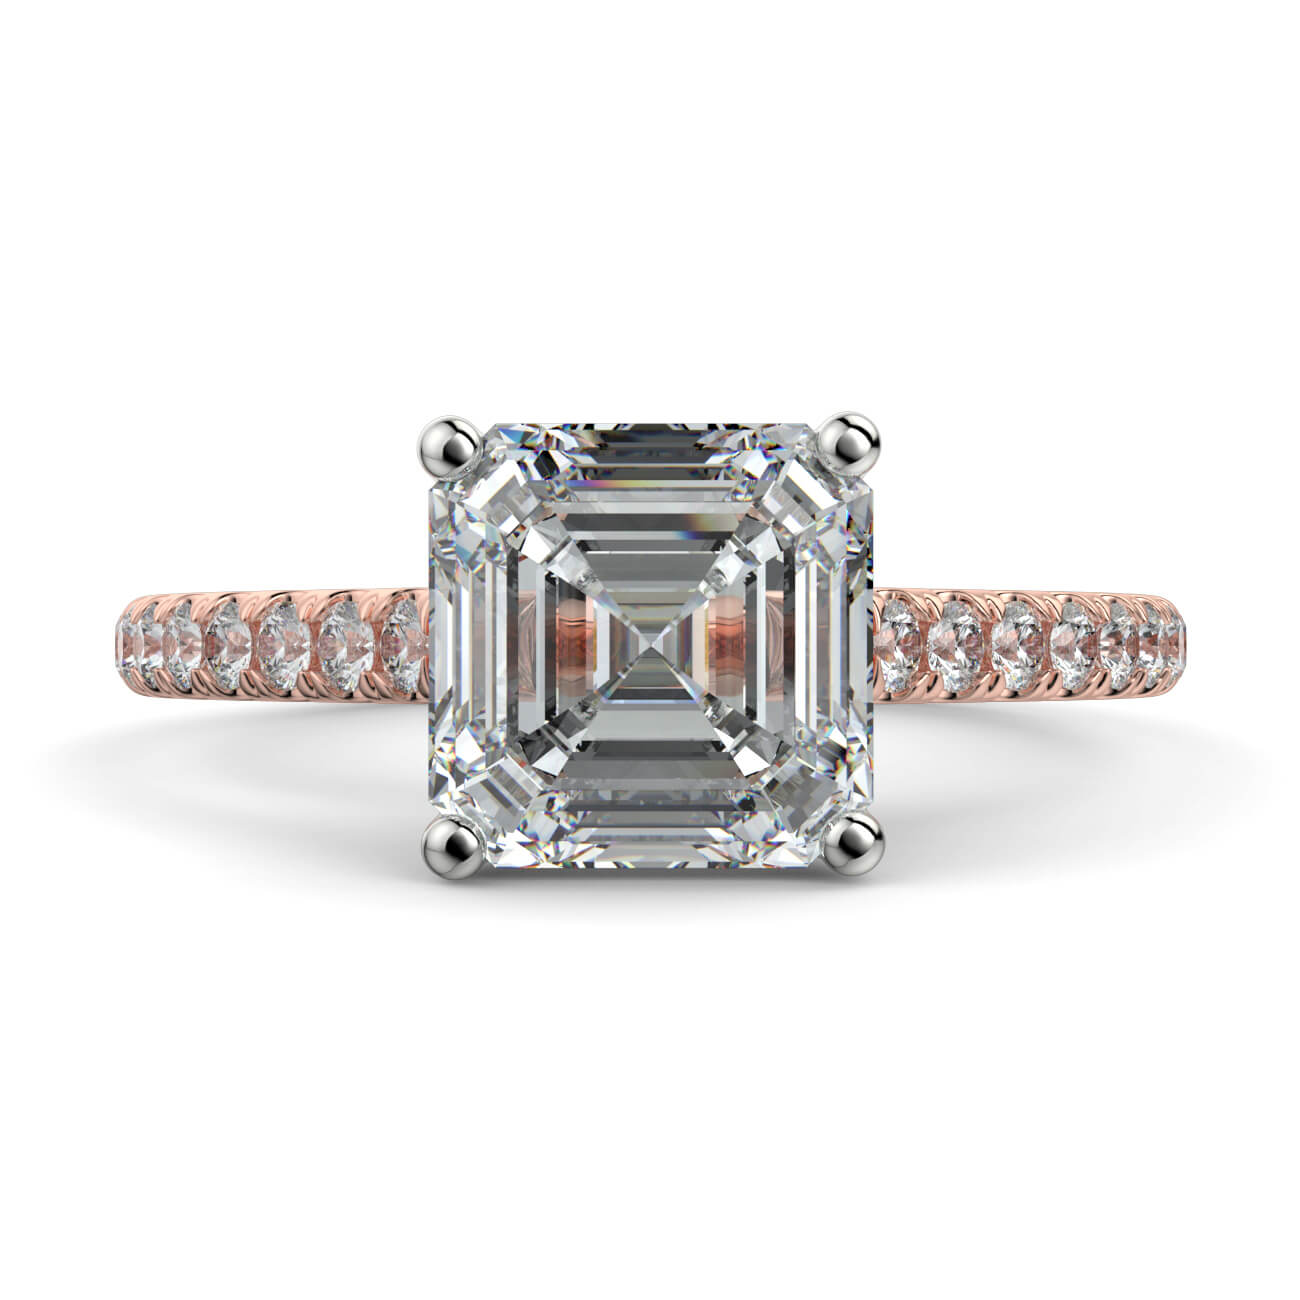 Asscher Cut diamond cathedral engagement ring in rose and white gold – Australian Diamond Network